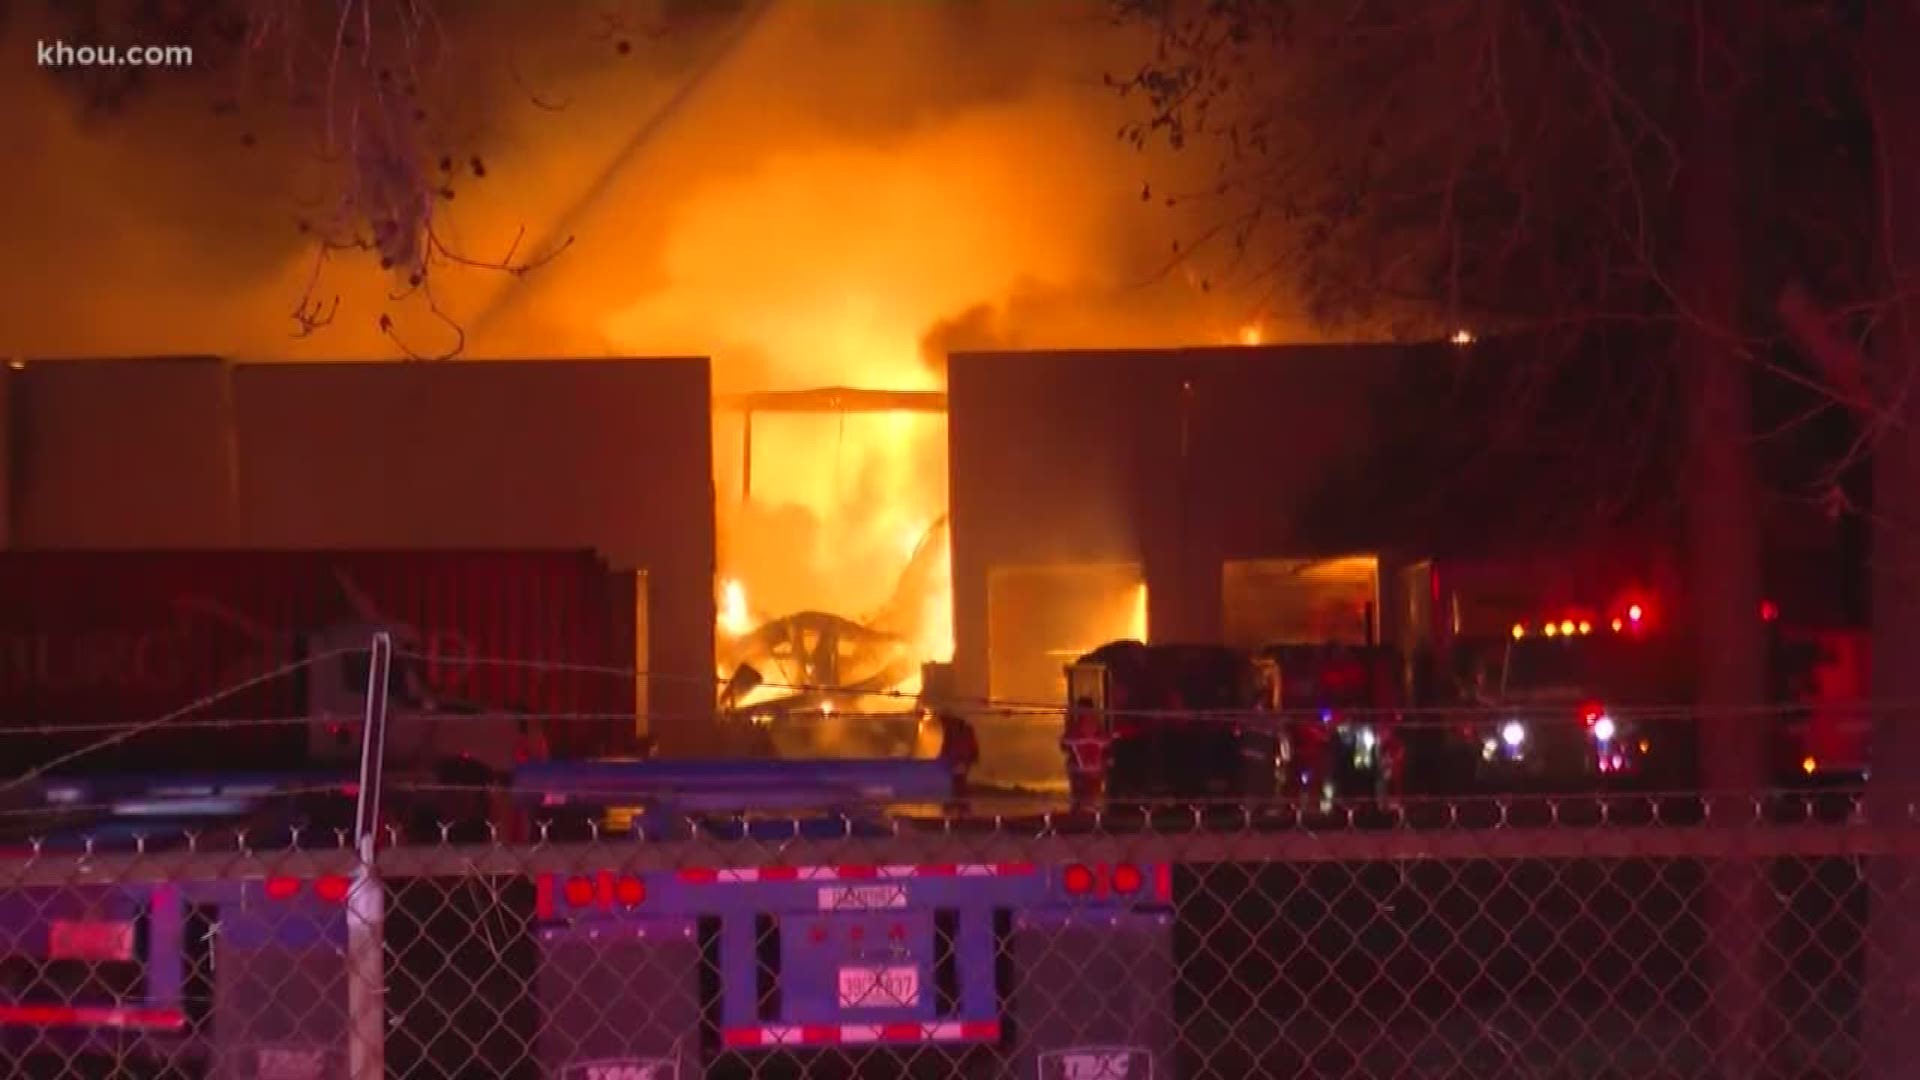 Houston firefighters were extra cautious while responding to a massive fire at a clothes recycling facility on Monday night after last week's industrial explosion.